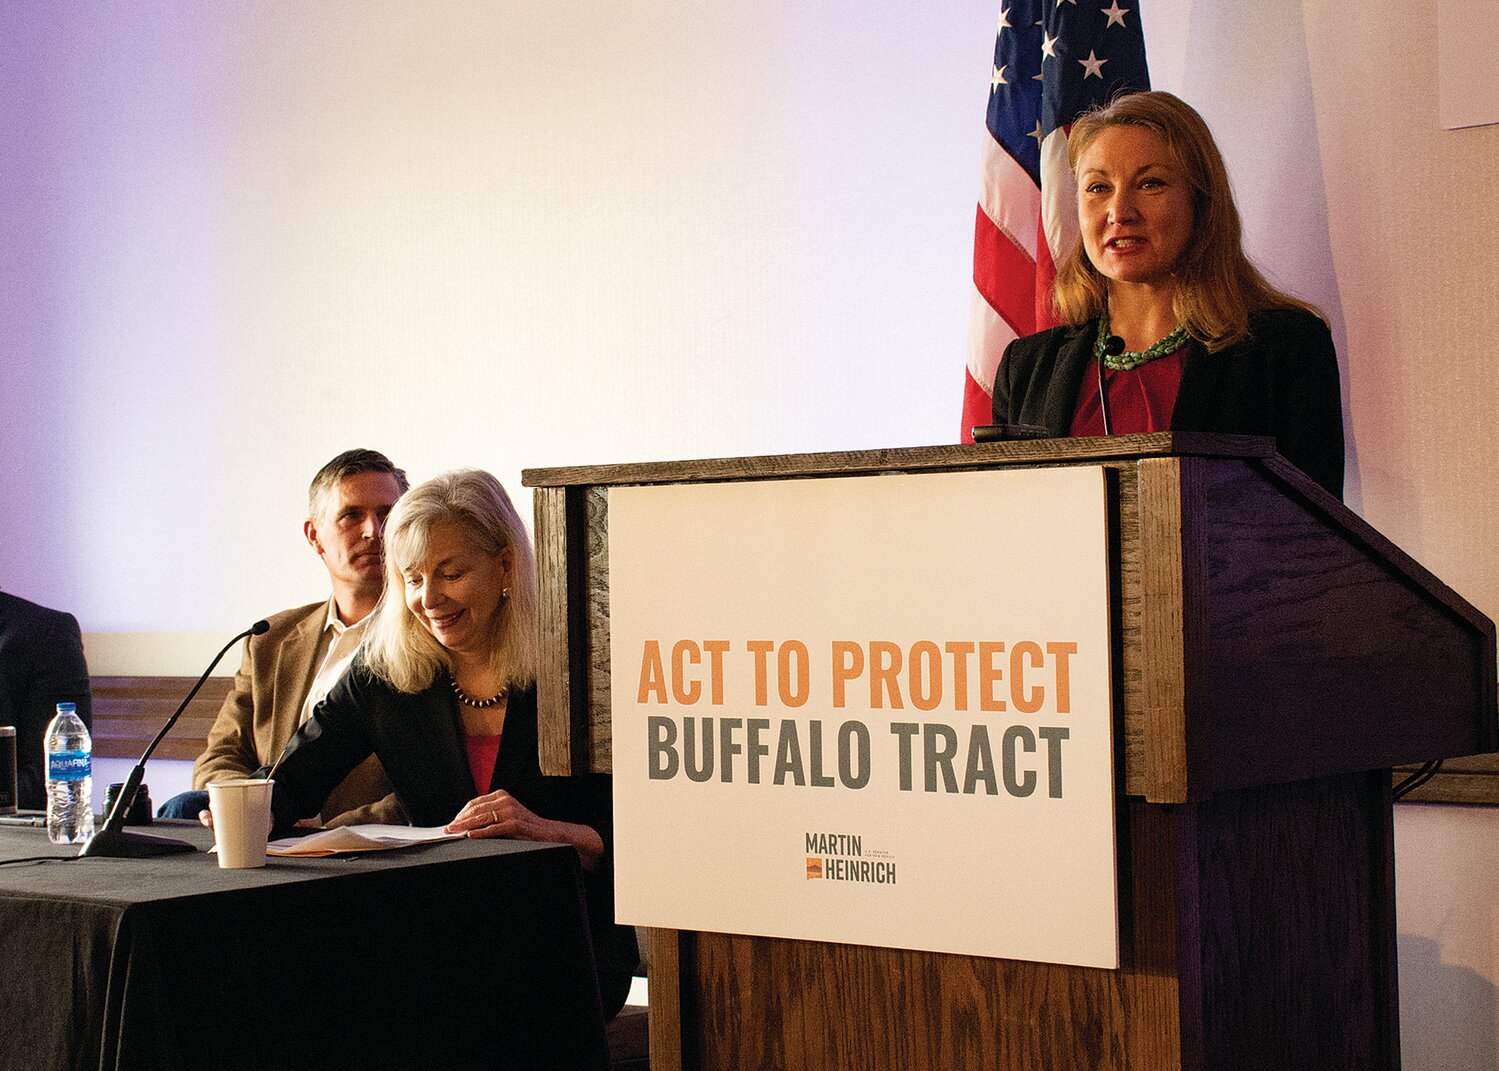 First Congressional District Rep. Melanie Stansbury speaks during a March 17 event promoting passage of the Buffalo Tract Protection Act she introduced in the House to ban mining on federal lands in Placitas. Listening are Sen. Martin Heinrich, sponsor of the Senate version of the bill, and Mary-Rose de Vallardes, chair of the Placitas-based Land Use Protection Trust. (Bill Diven/Sandoval Signpost)